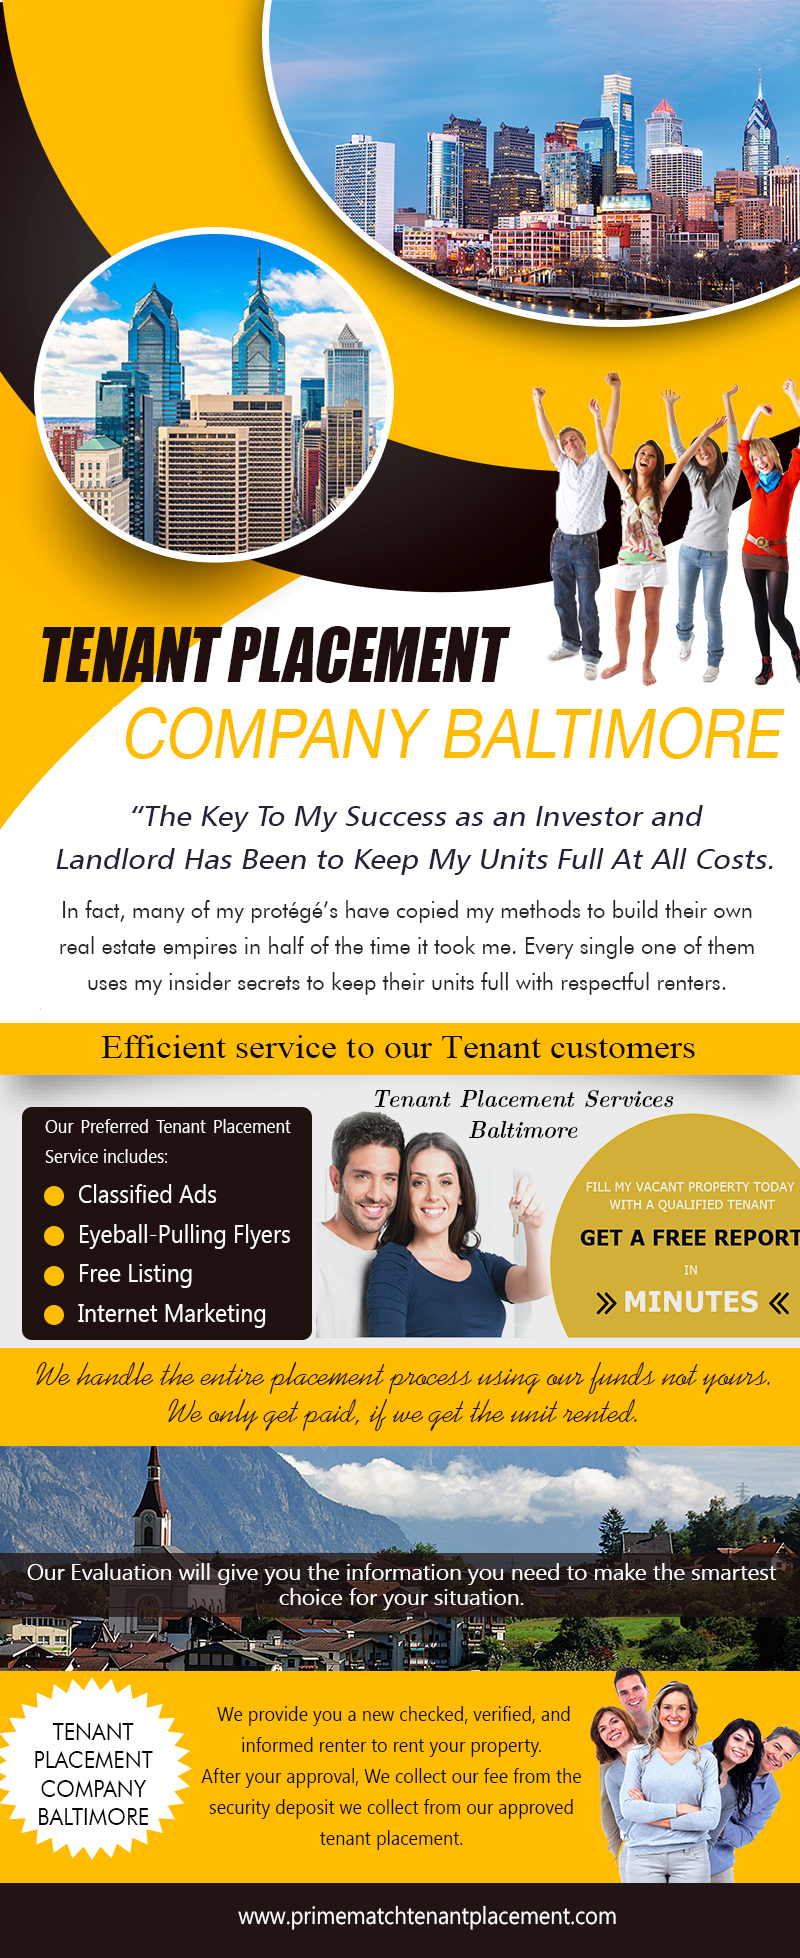 Tenant Placement Services Baltimore